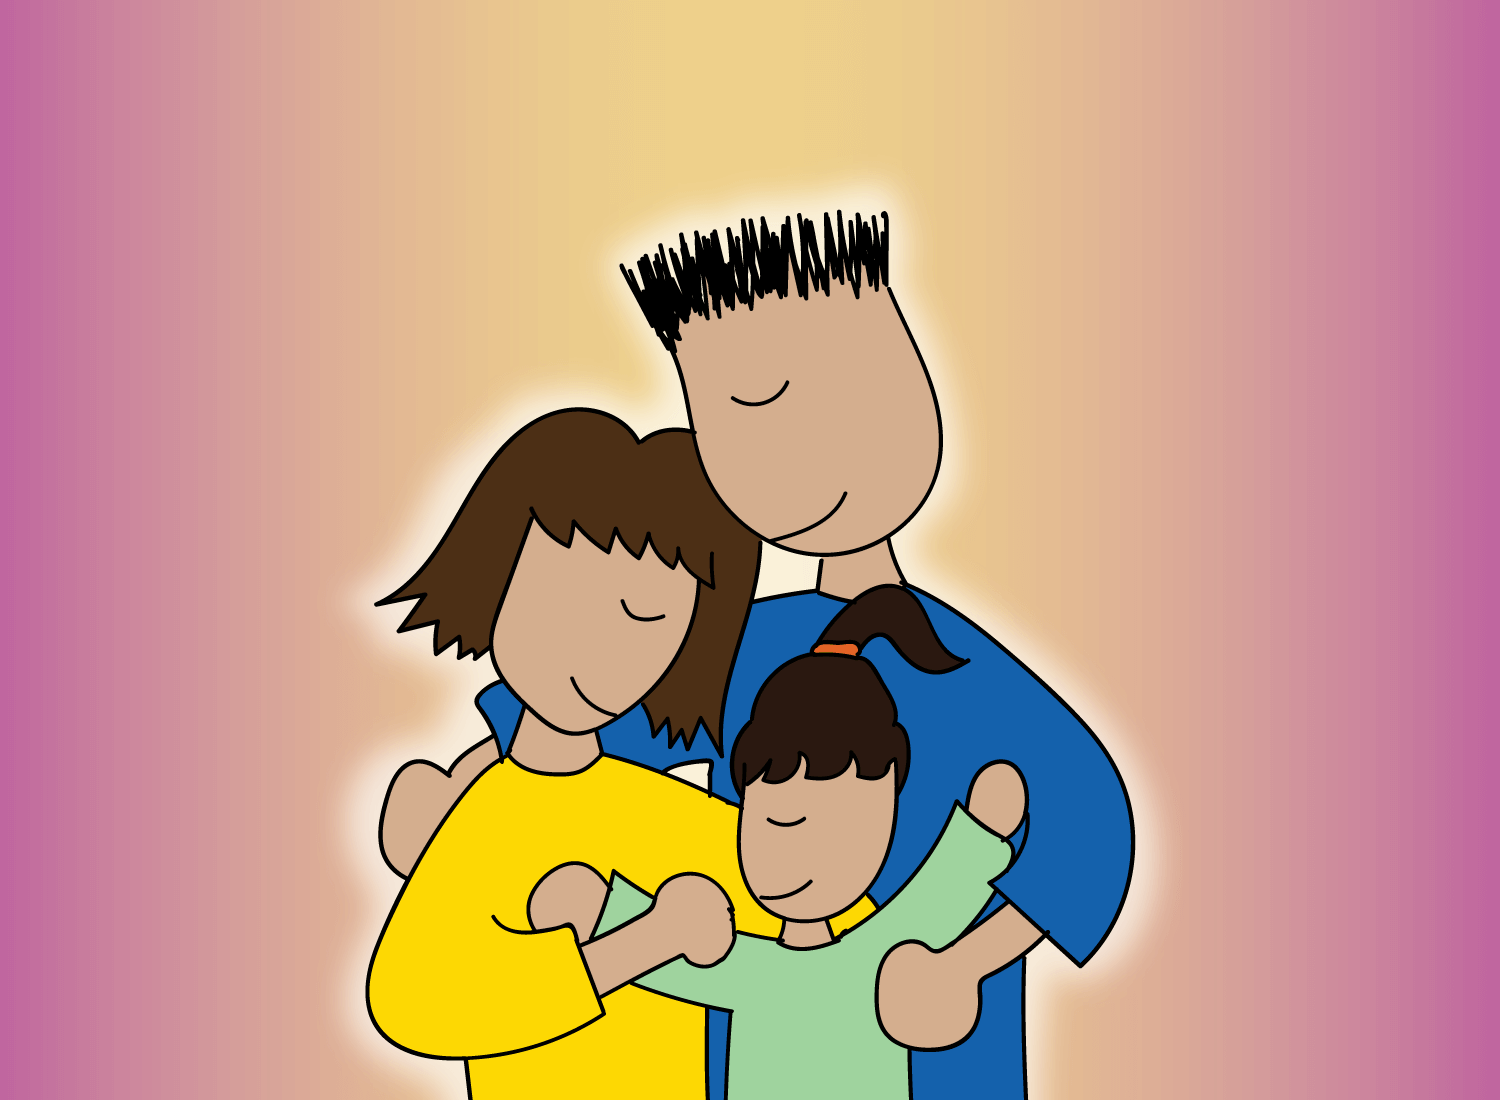 family hugging each other drawing illustration